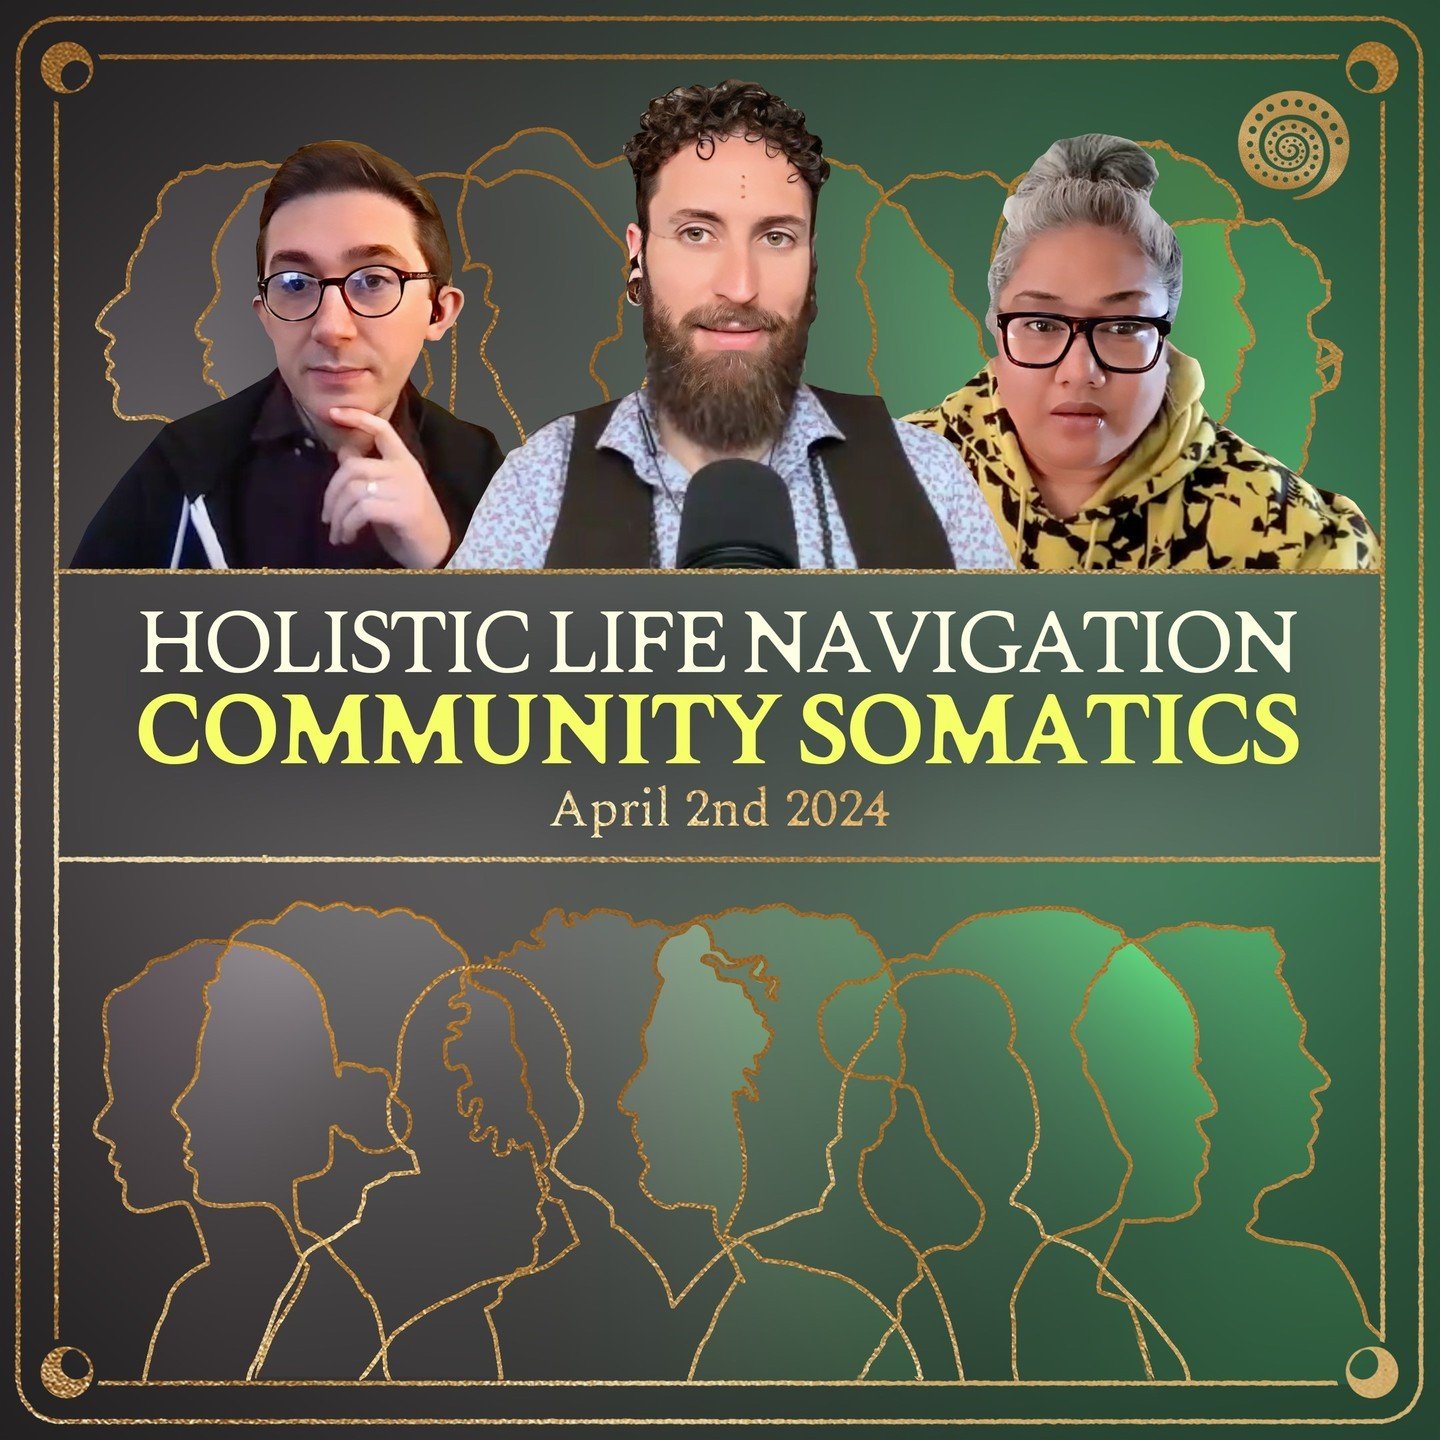 Today&rsquo;s episode is a replay of the most recent Community Somatics. Luis takes us through a variety of topics and practices, as well as a demo, as he invites us to drop in, play with the philosophy and techniques of somatic work, and see what we